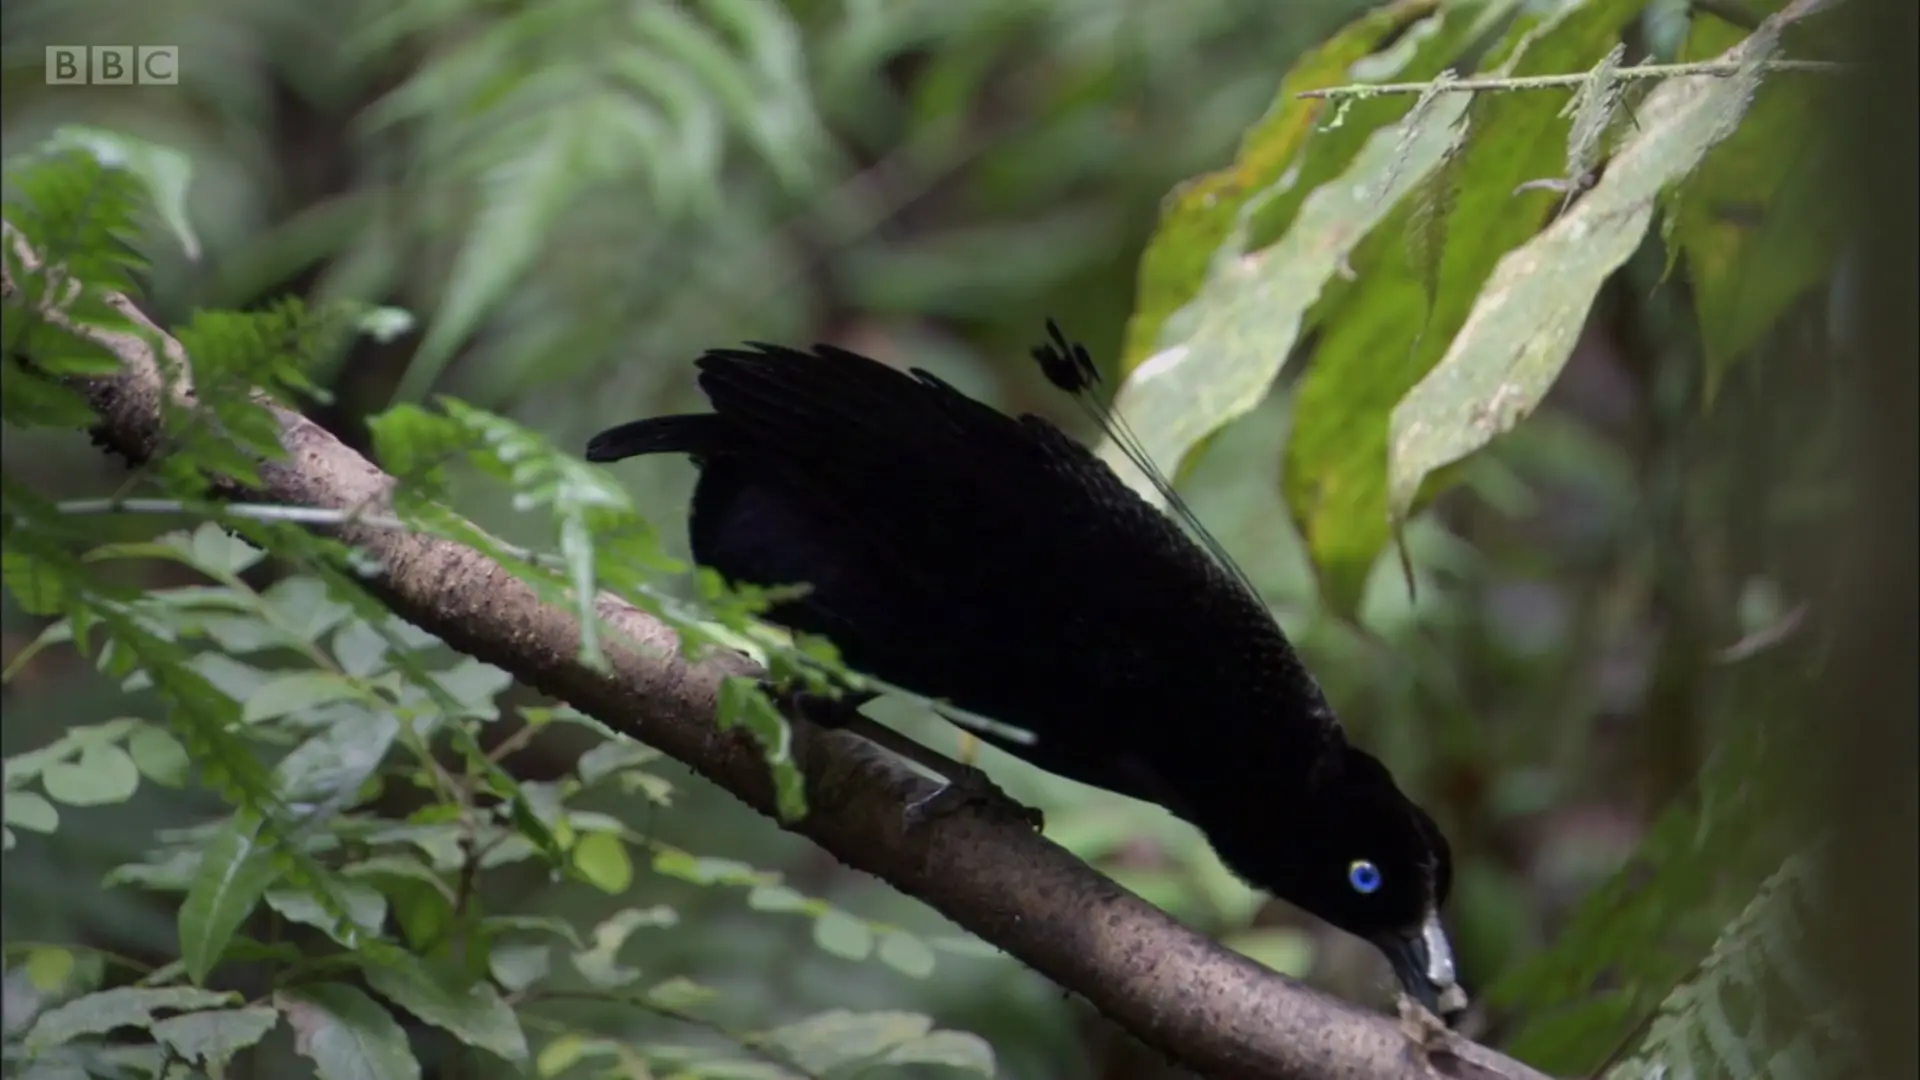 Lawes's parotia (Parotia lawesii lawesii) as shown in Planet Earth - From Pole to Pole